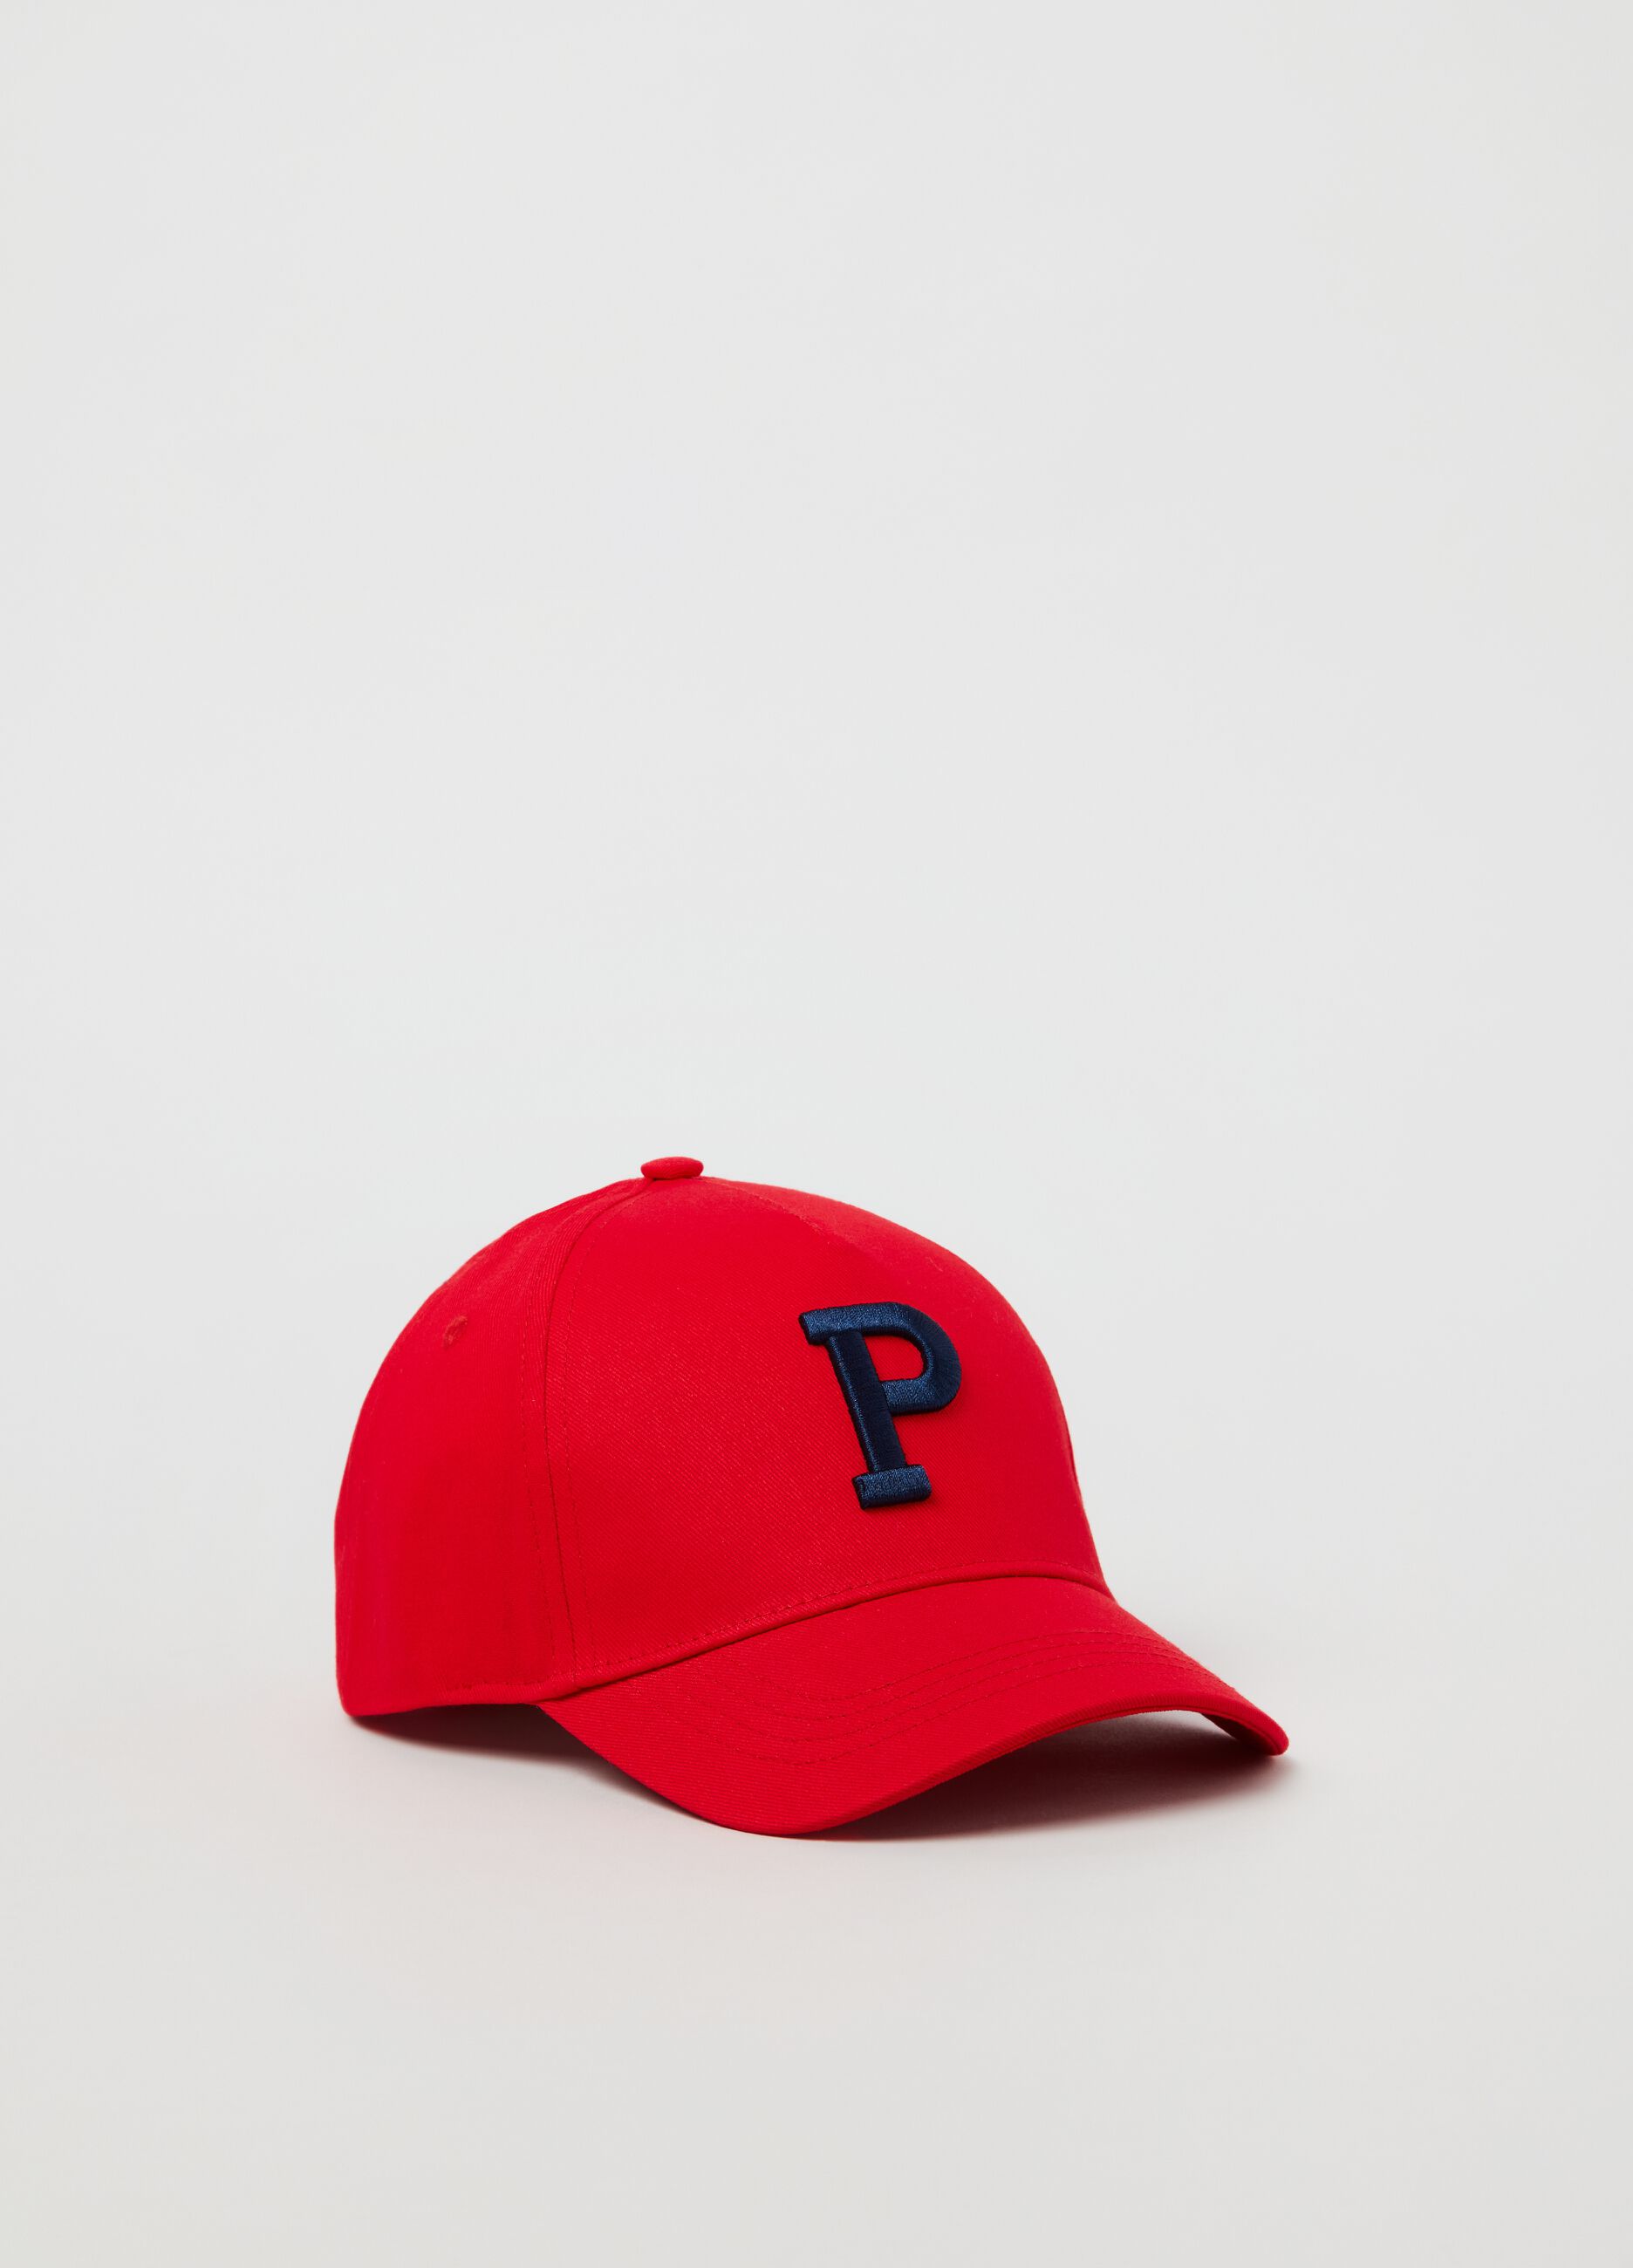 Baseball cap with embroidery